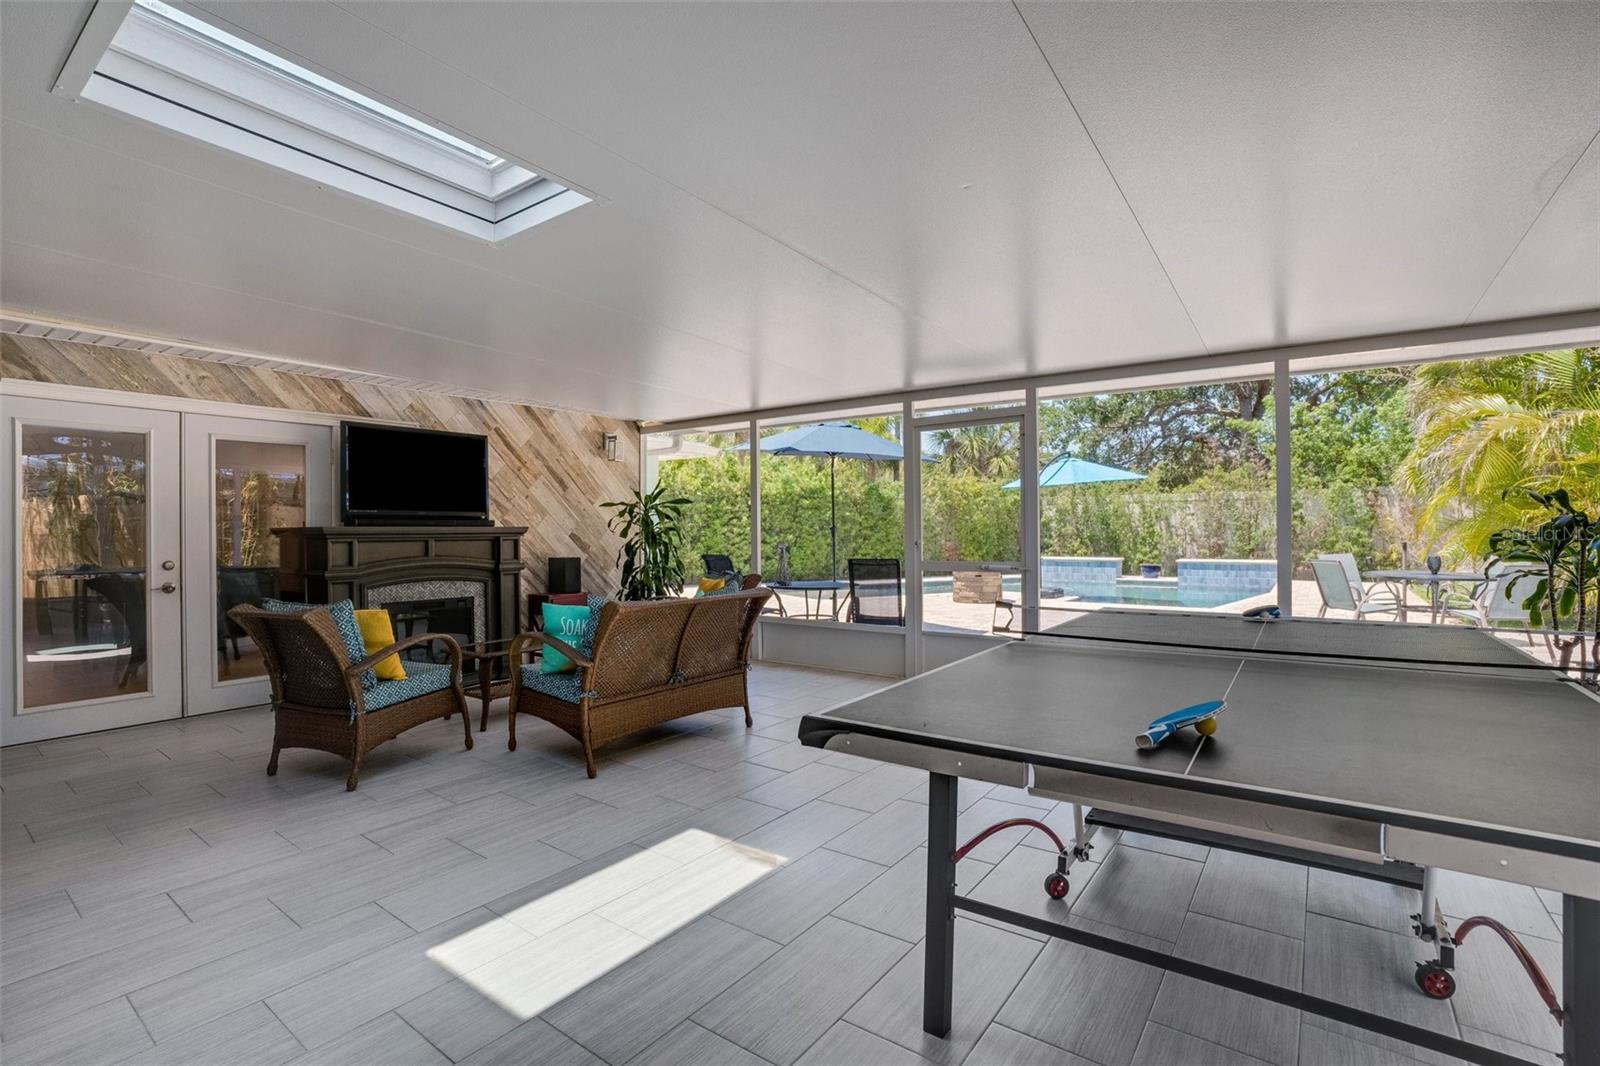 Florida Outdoor living at it's best.  Extremely large screened in back porch with Sauna, Ping Pong table, exercise equipment and TV area.  Don't forget the SkyLight.